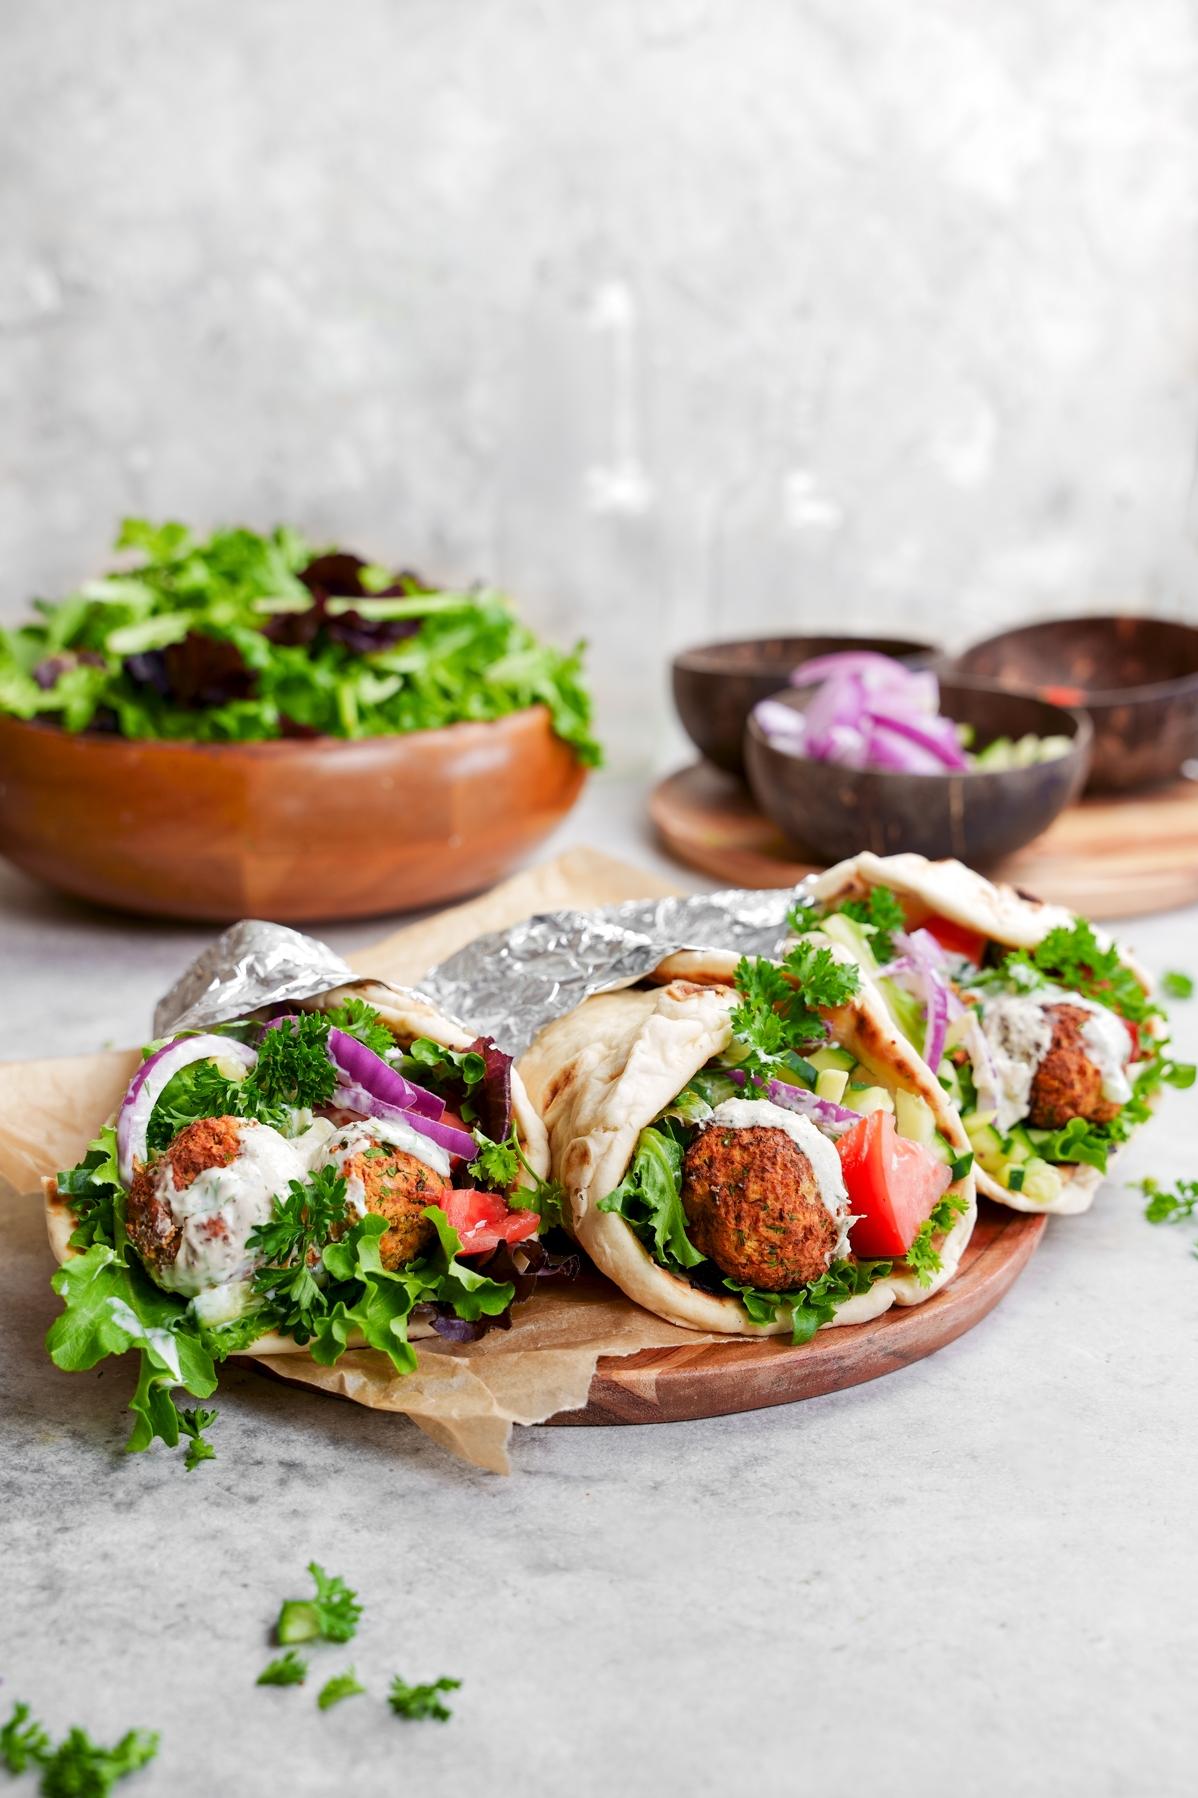  Top your gyro with our Napa Goat Ranch Easy Gyro or Falafel Sauce for a burst of flavor.